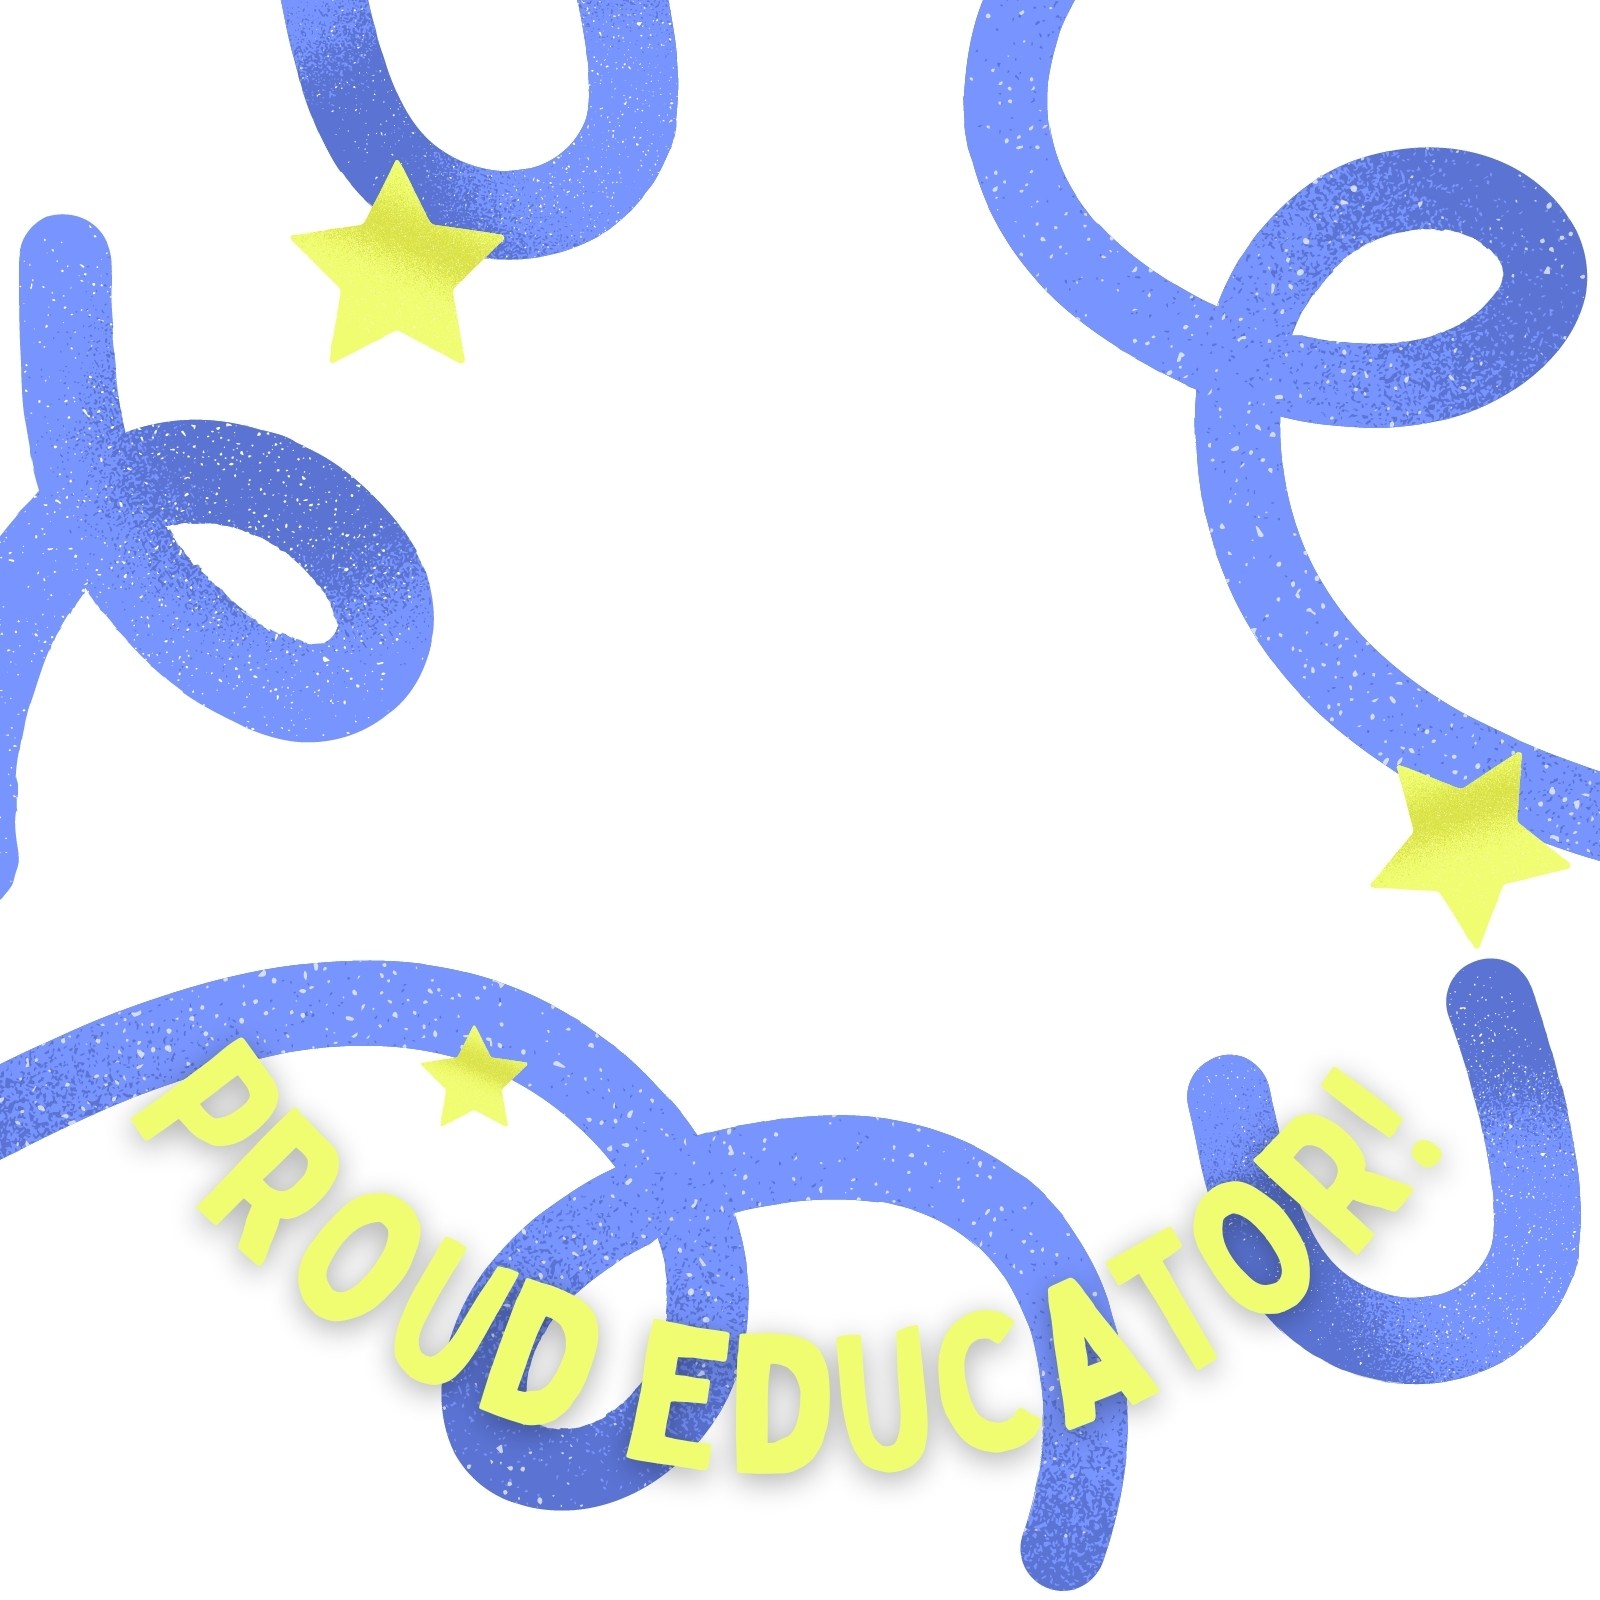 Blue and Yellow Squiggly Line Education Facebook Profile Frame